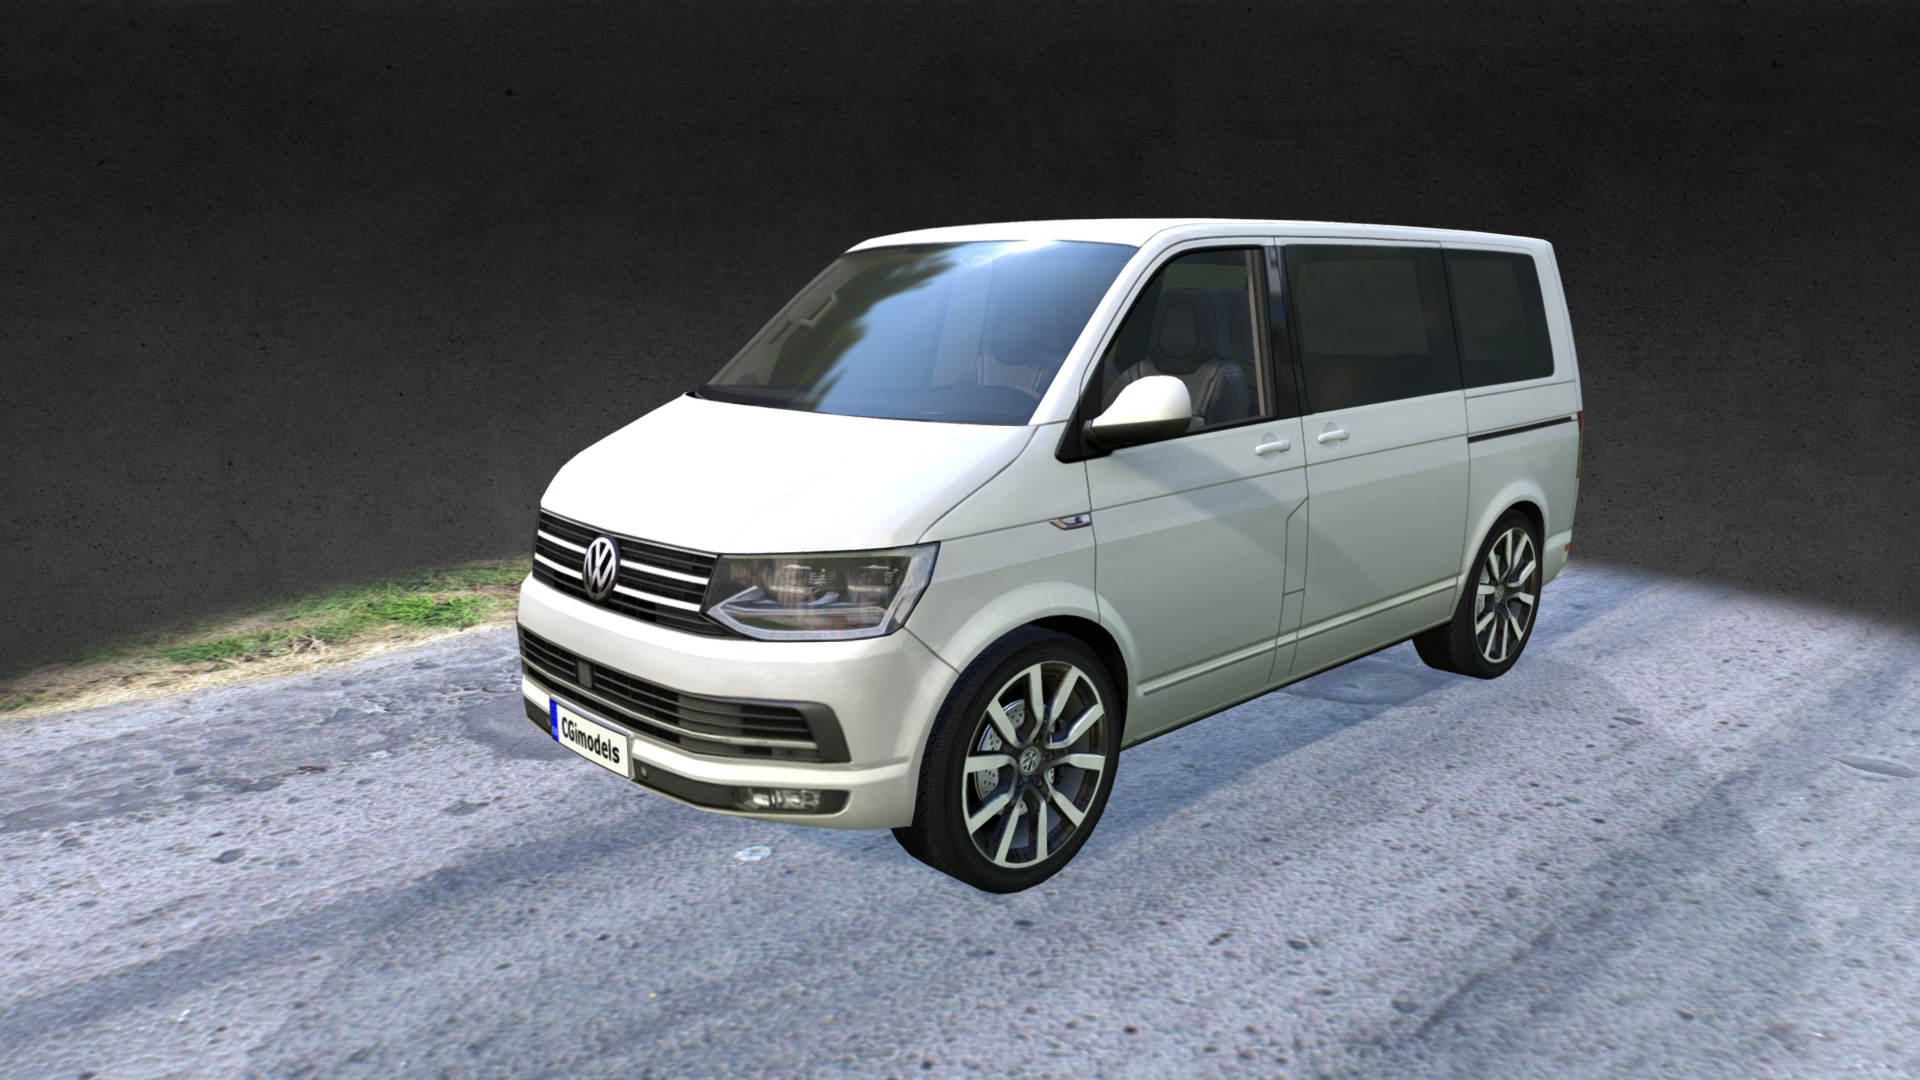 3D model Volkswagen T6 Multivan - This is a 3D model of the Volkswagen T6 Multivan. The 3D model is about a white car parked on a road.